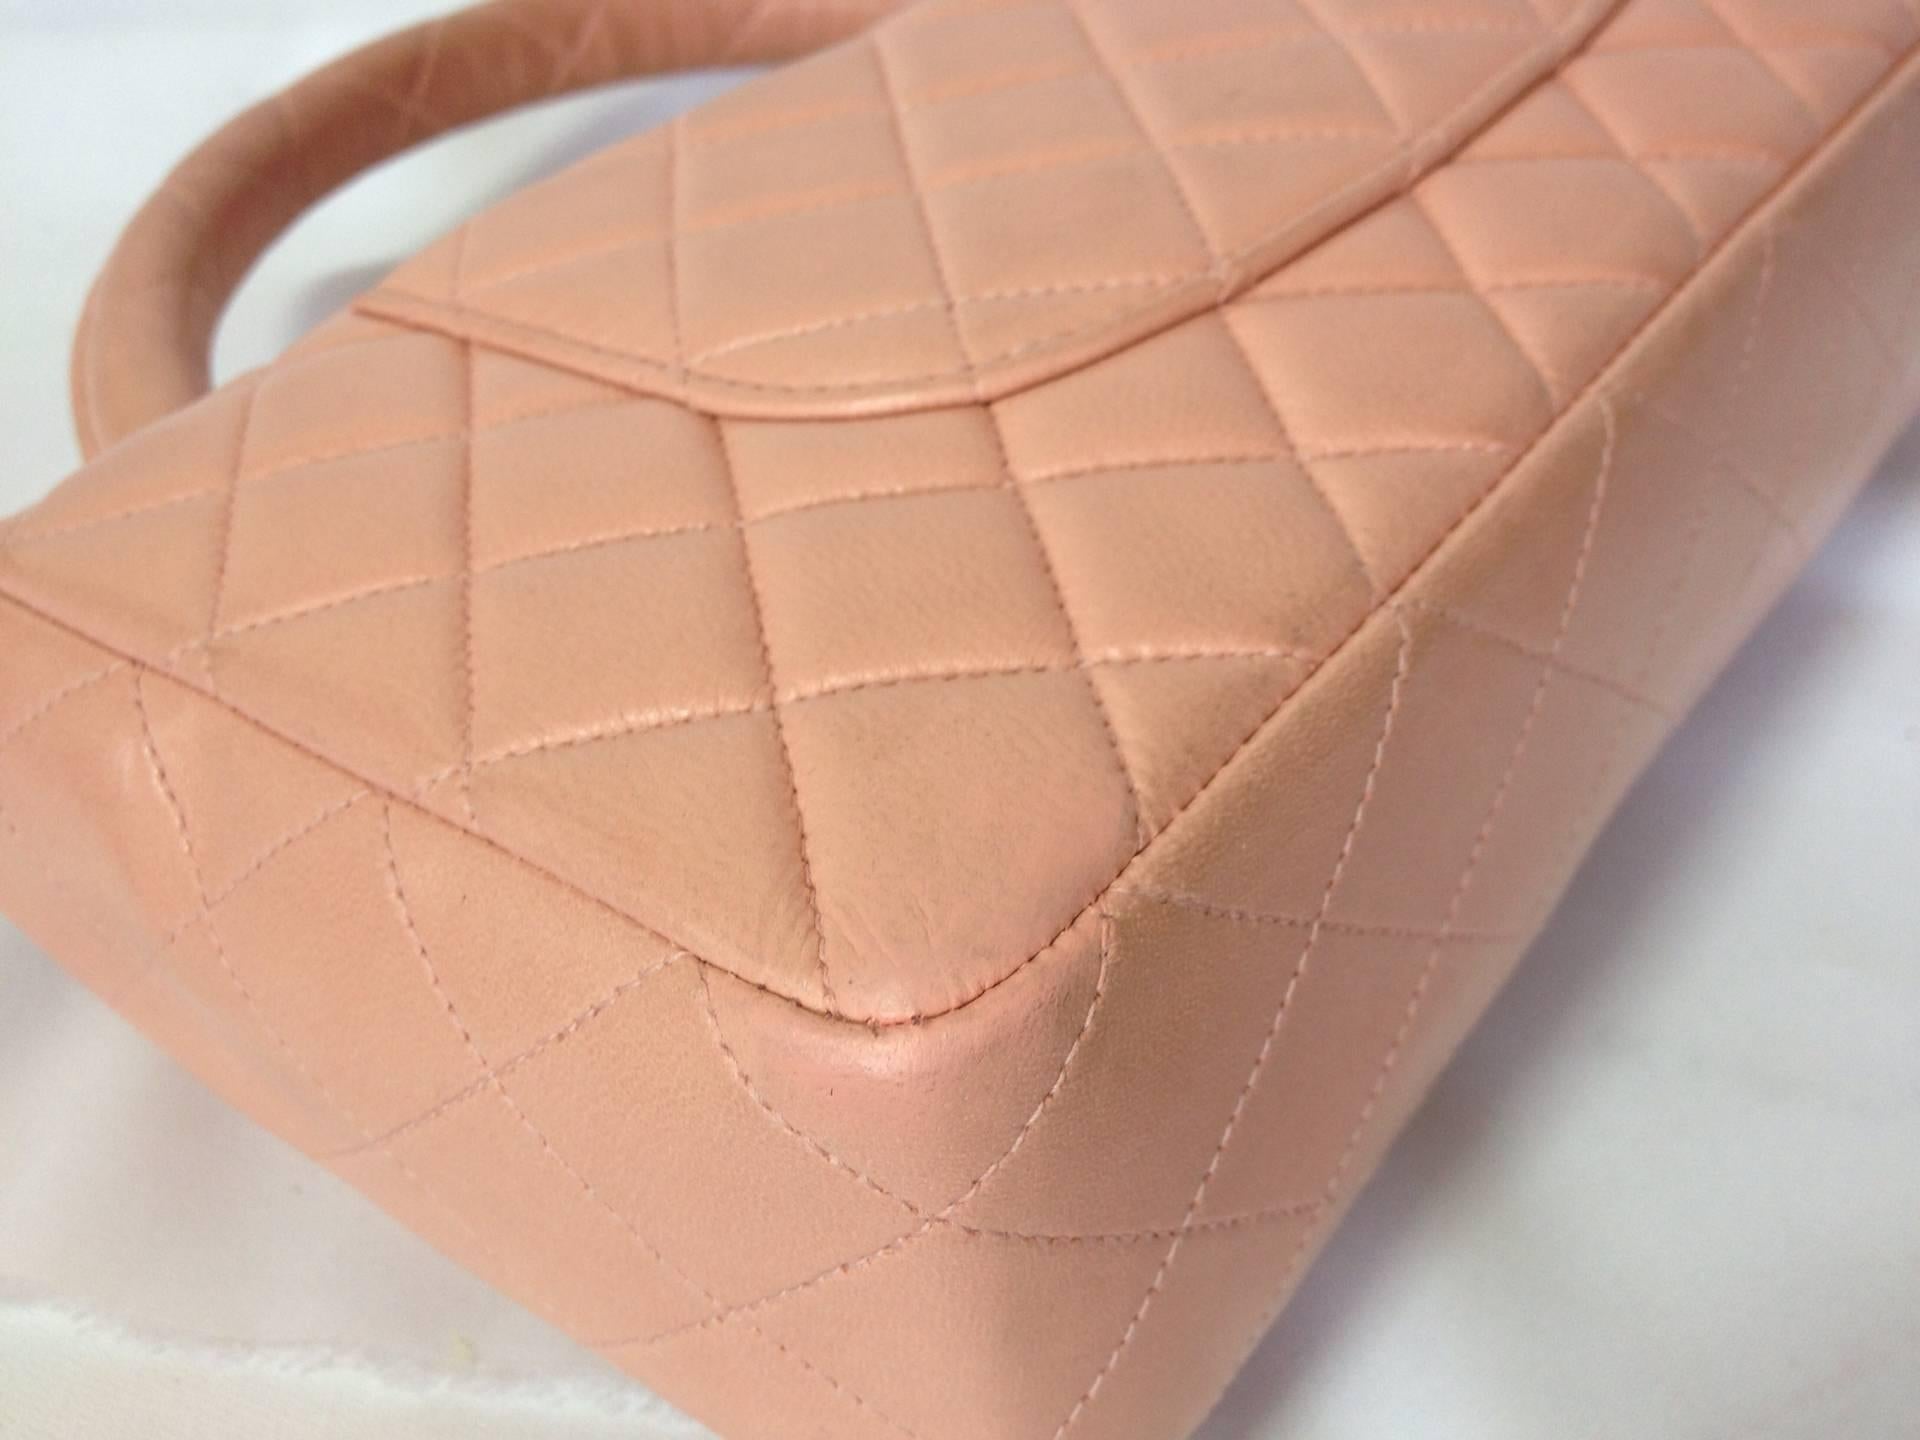 Women's Vintage CHANEL milky pink color lambskin classic 2.55 handbag purse with gold CC For Sale